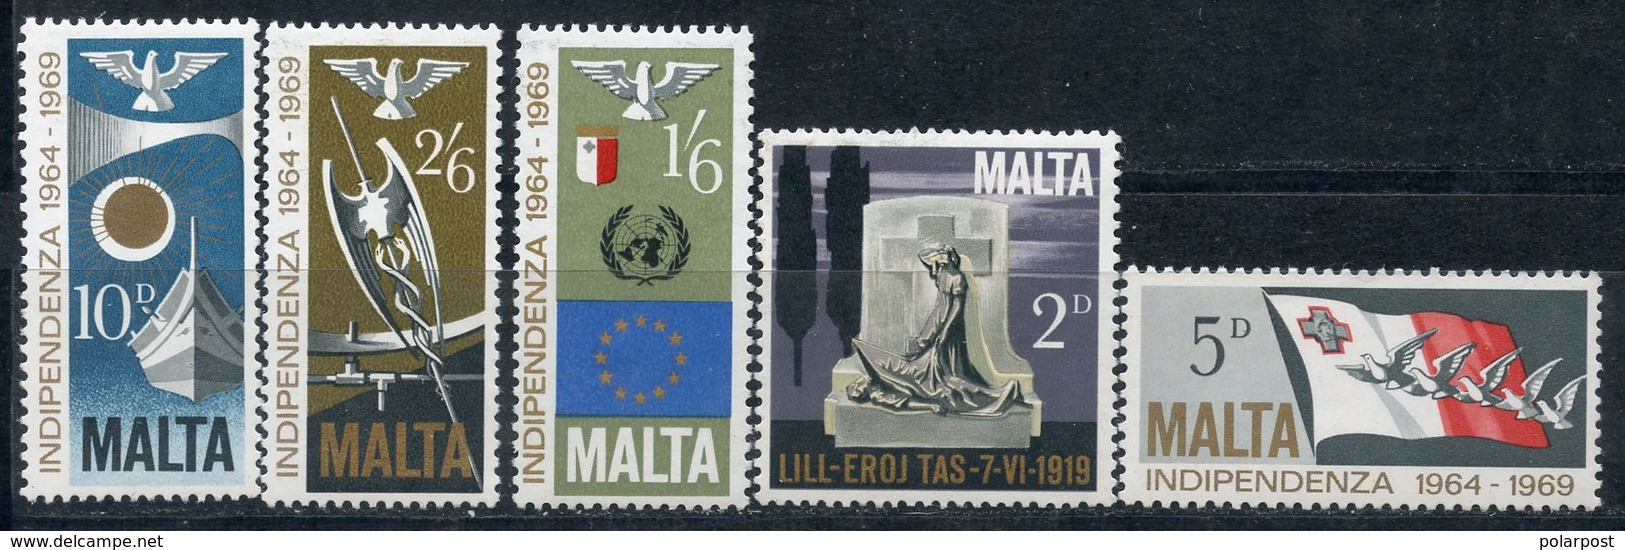 Malta 1969 3973-395 5 Years Of Independence Of Malta. Pigeons And The Flag Of Malta. Dove, UN Emblem And EU Flag. Dove A - Malta